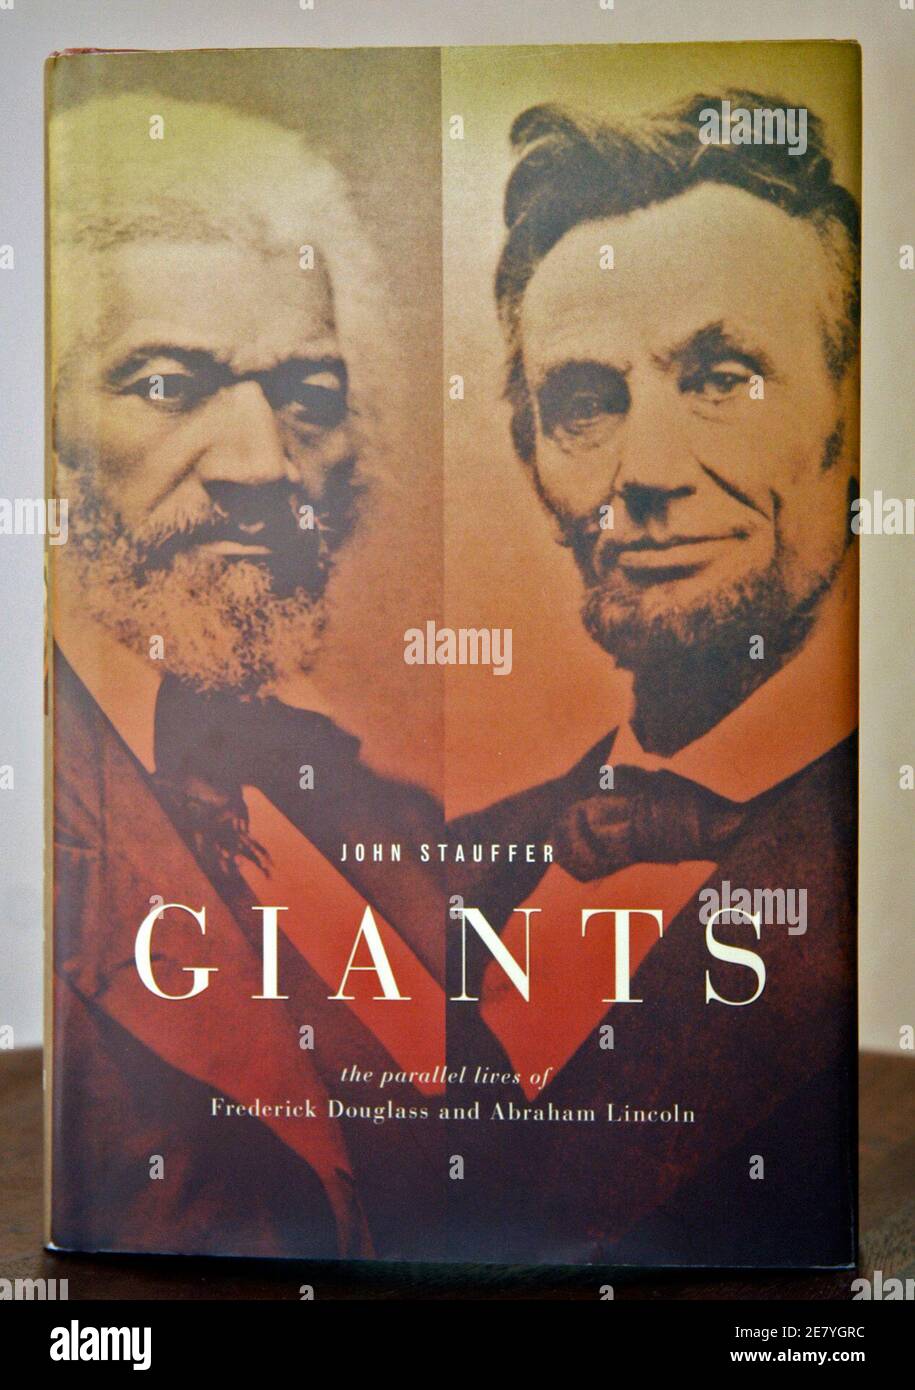 A new 'double biography' of two 19th century American icons has a special resonance this political season with the election of Barack Obama. 'Giants: the parallel lives of Frederick Douglass and Abraham Lincoln', by Harvard academic John Stauffer, traces the lives of these two men who became unlikely political allies in the struggle against American slavery.  REUTERS/Christa Cameron (UNITED STATES) Stock Photo